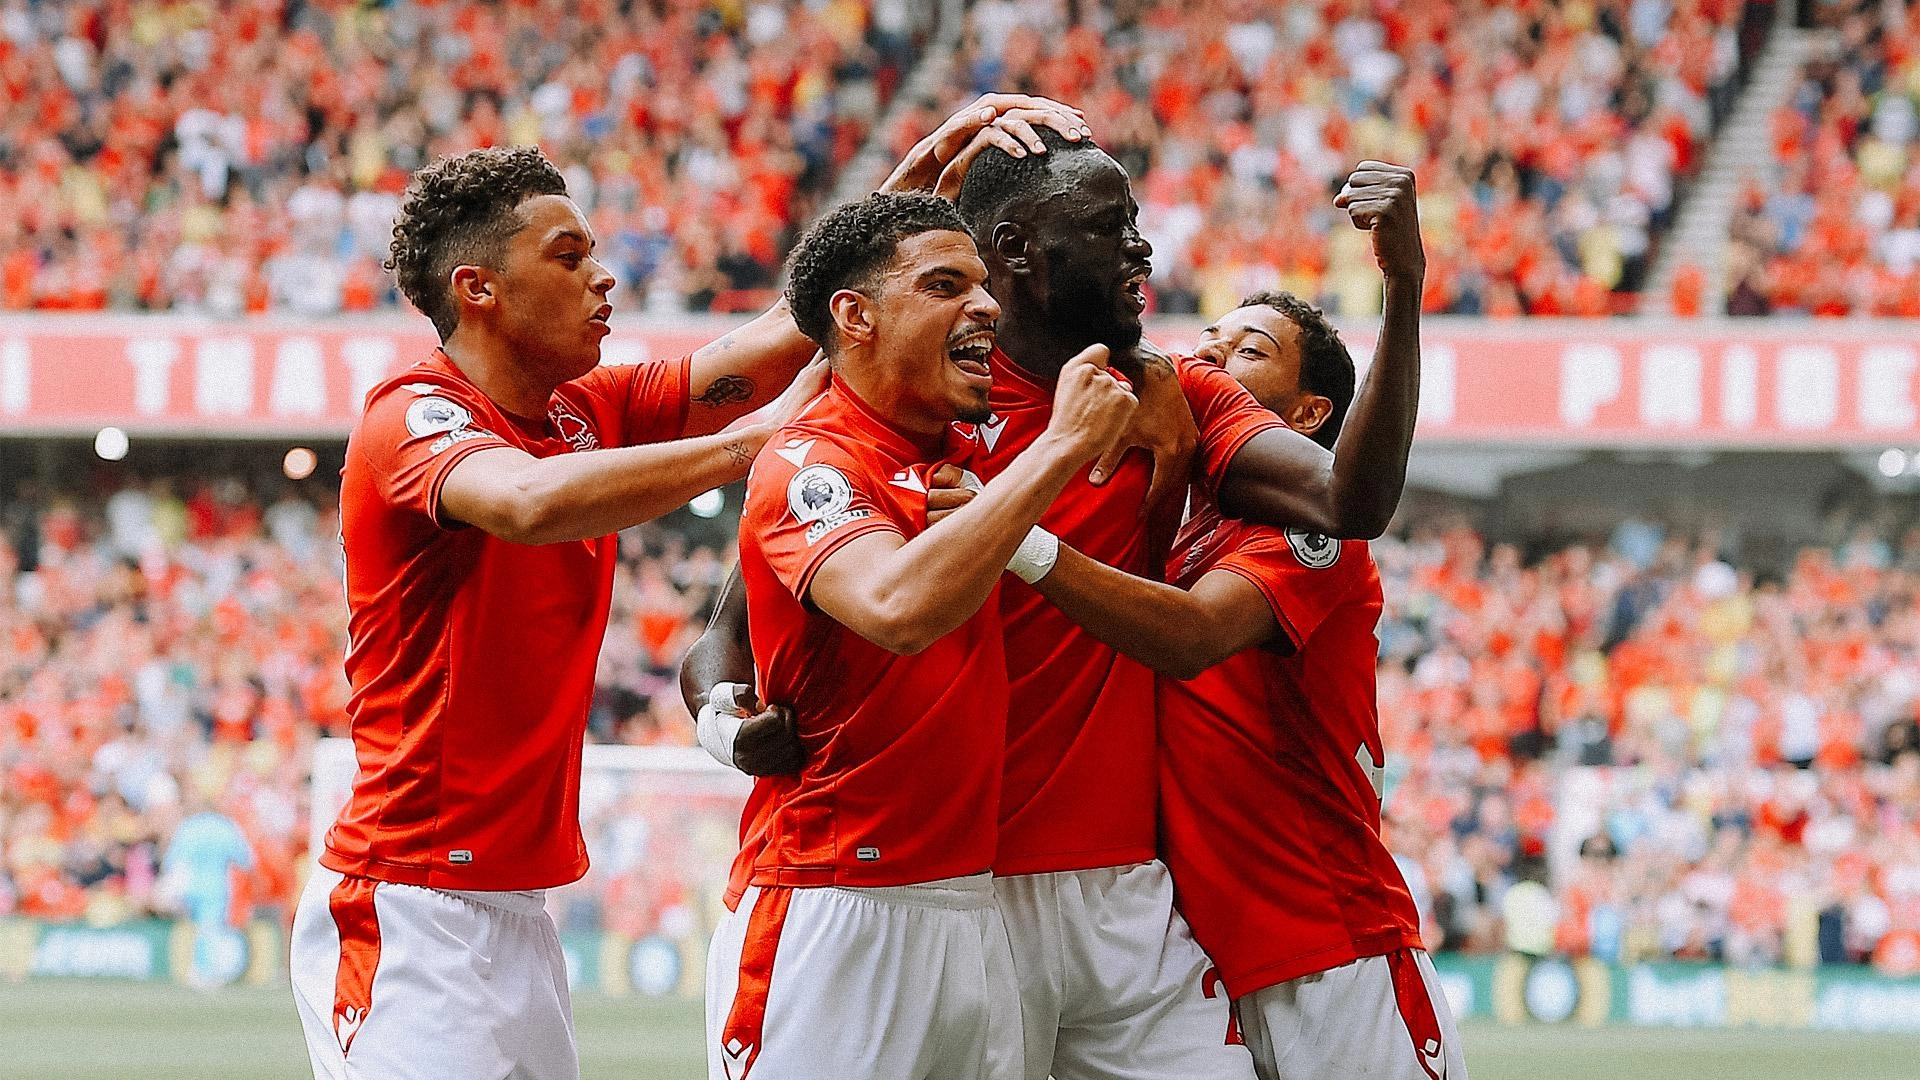 Premier League return, signings and former Reds - the view from Nottingham Forest